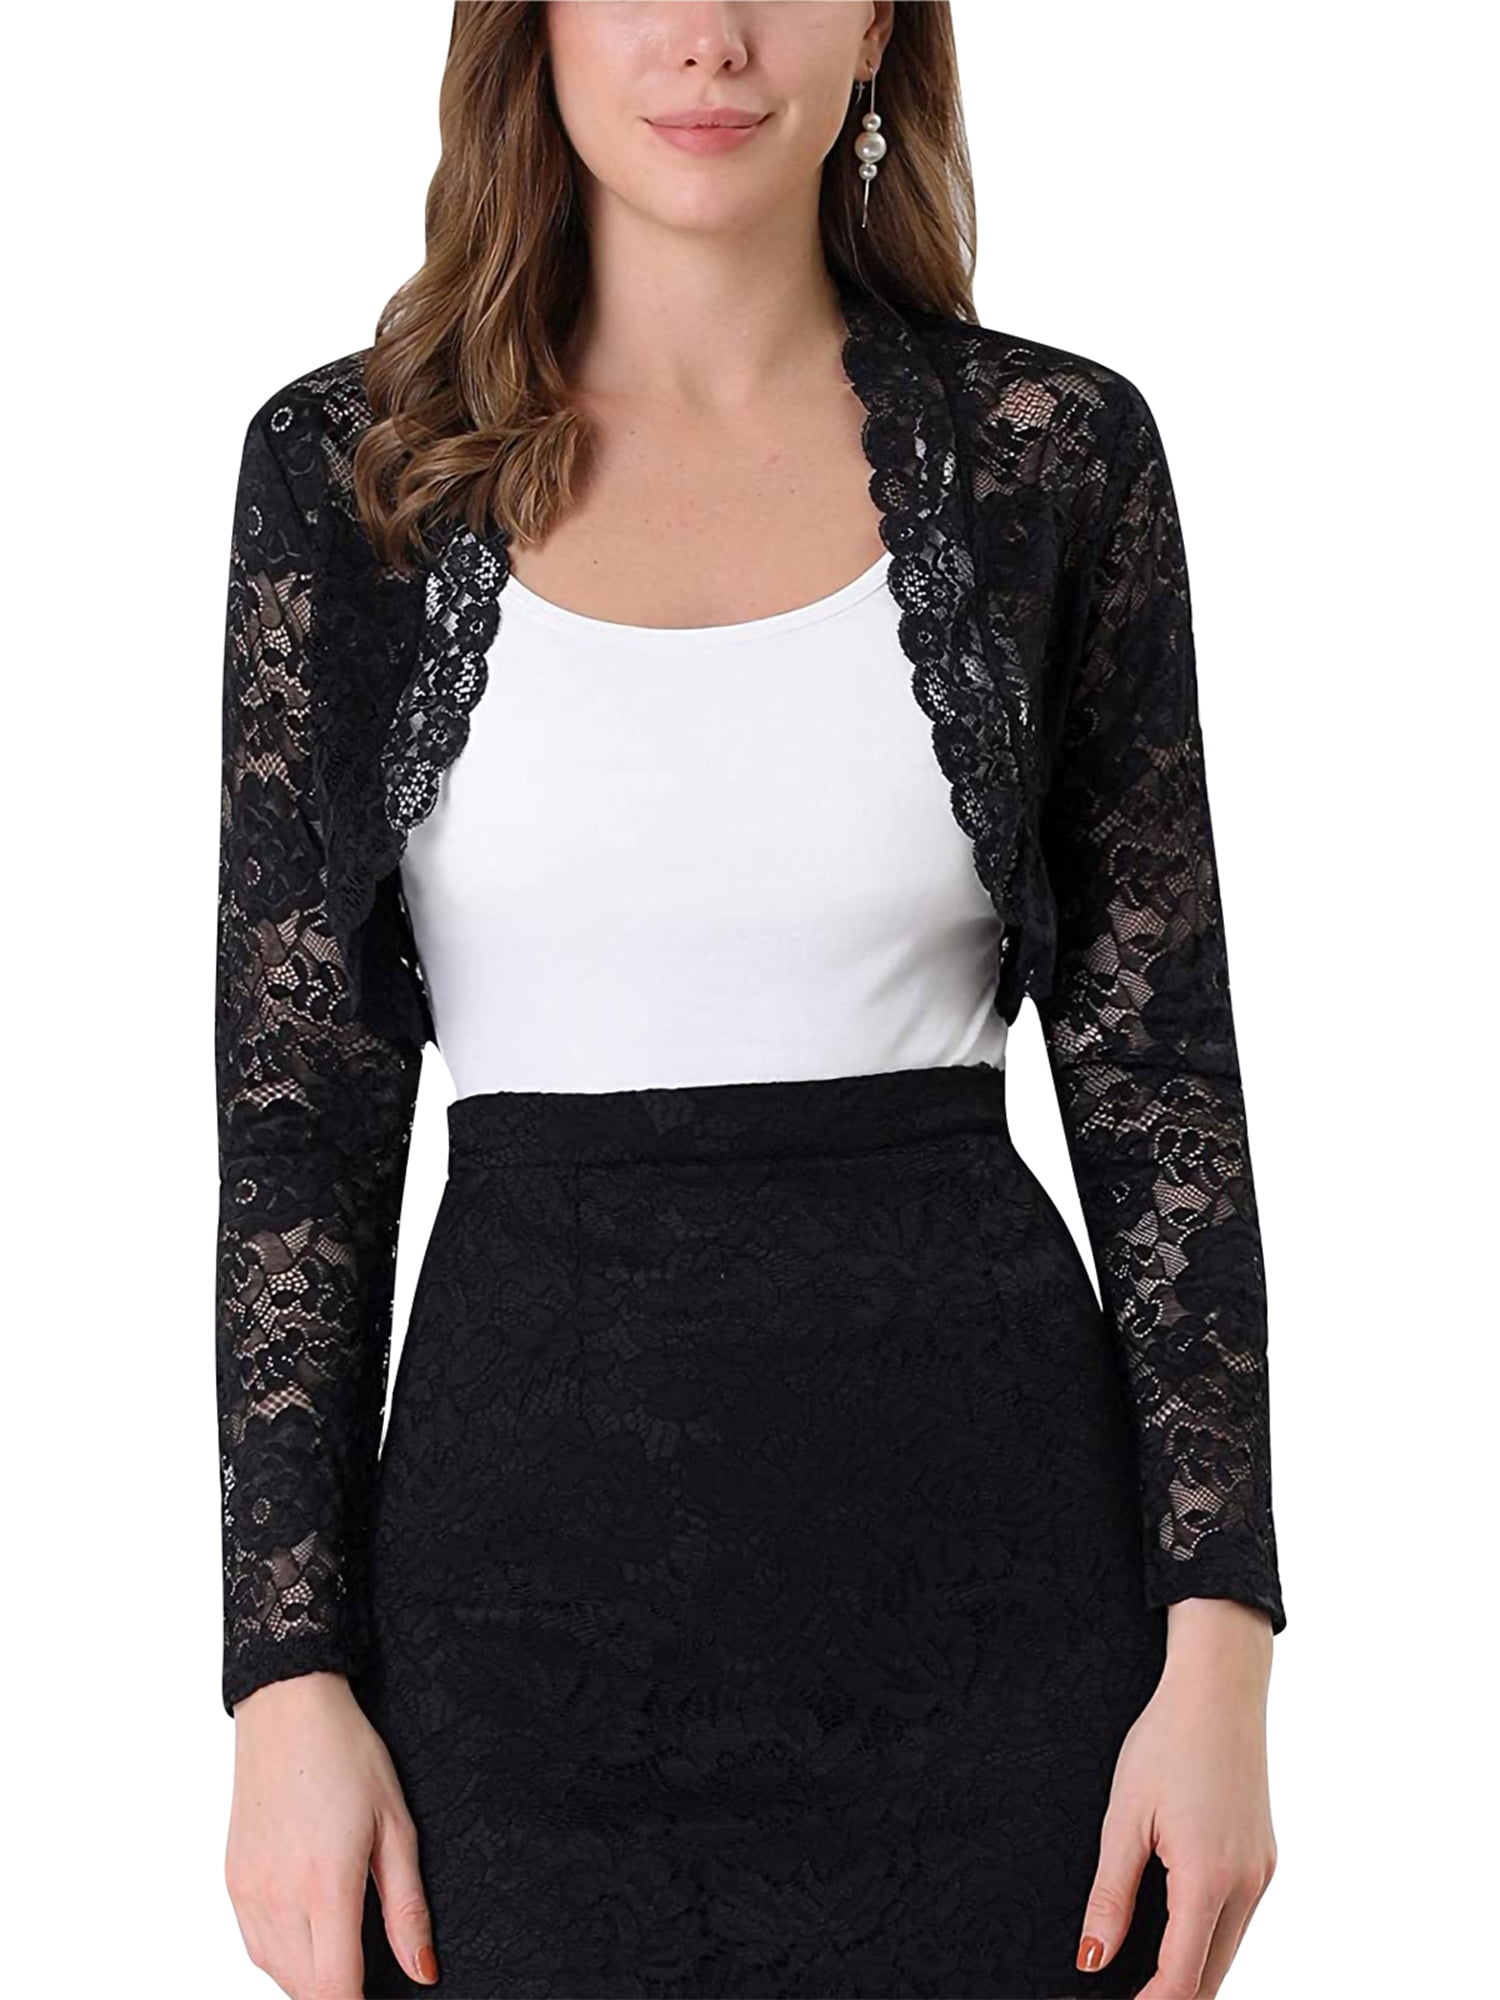 Women's Long Sleeve Shrugs Bolero Open Front Floral Lace Evening Party Cardigans